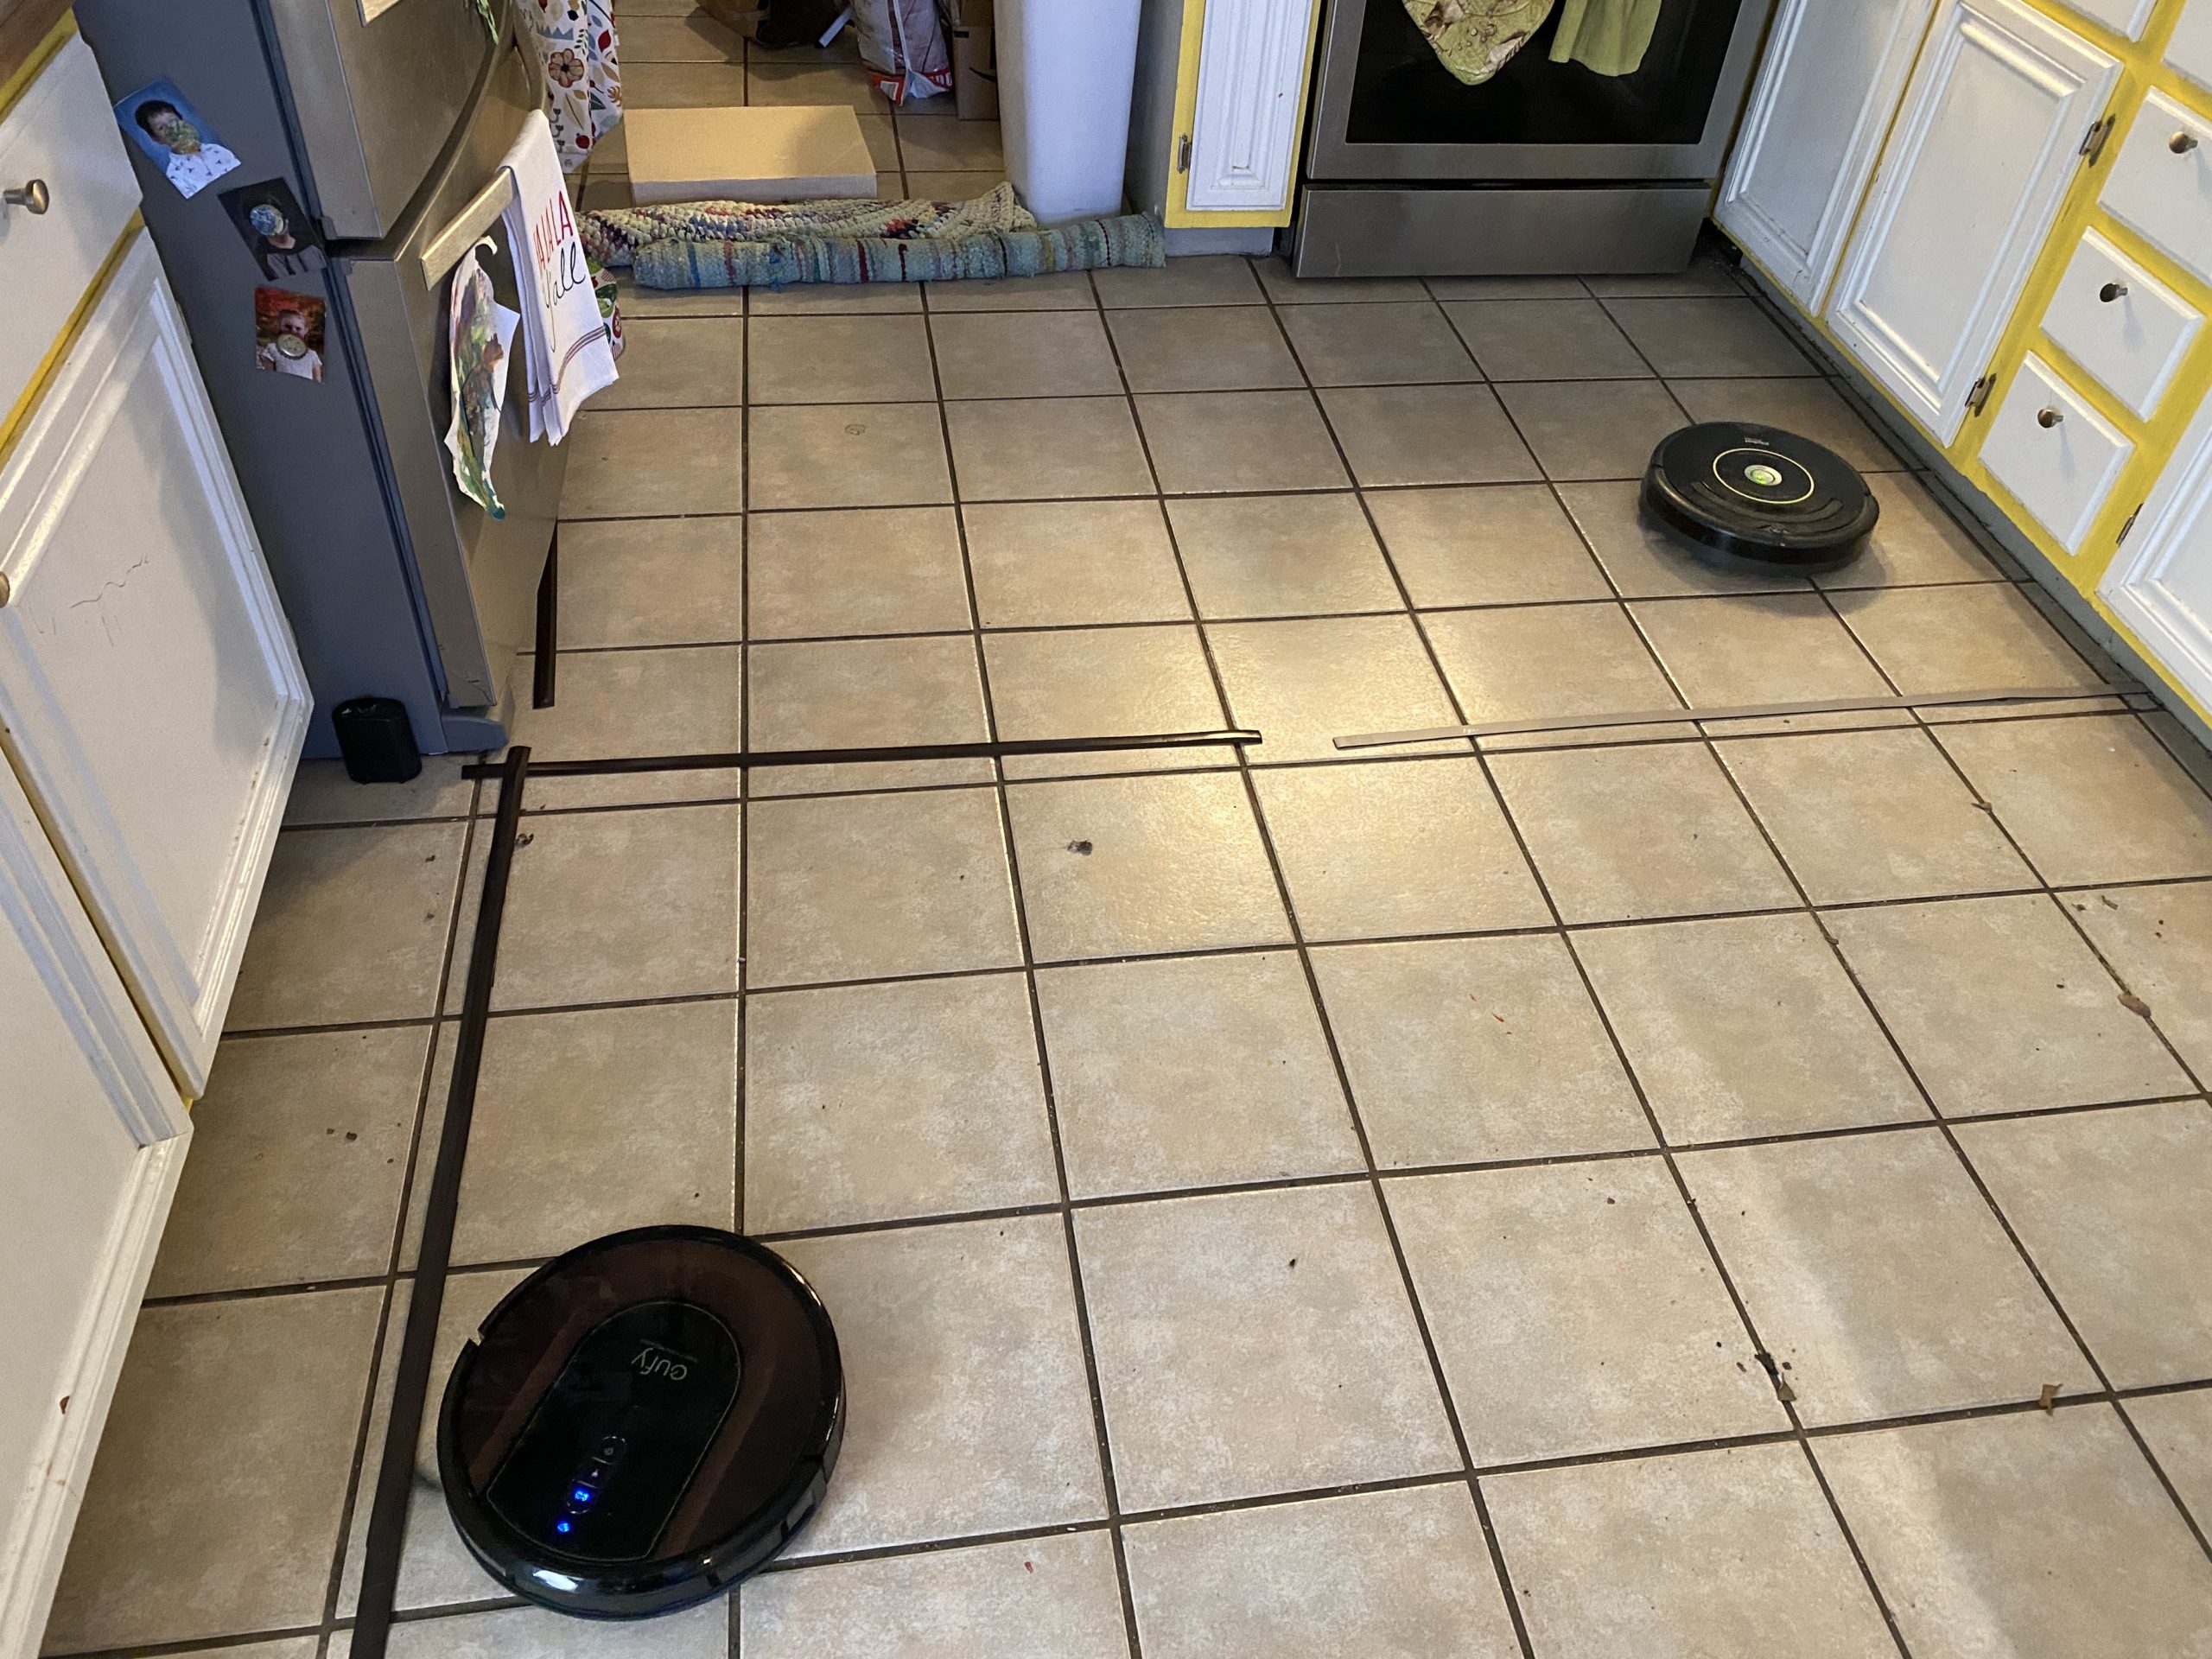 I pitted the new RoboVac against my old Roomba. The Roomba took longer, but did a more thorough job too. (Photo: Wes Davis/Gizmodo)